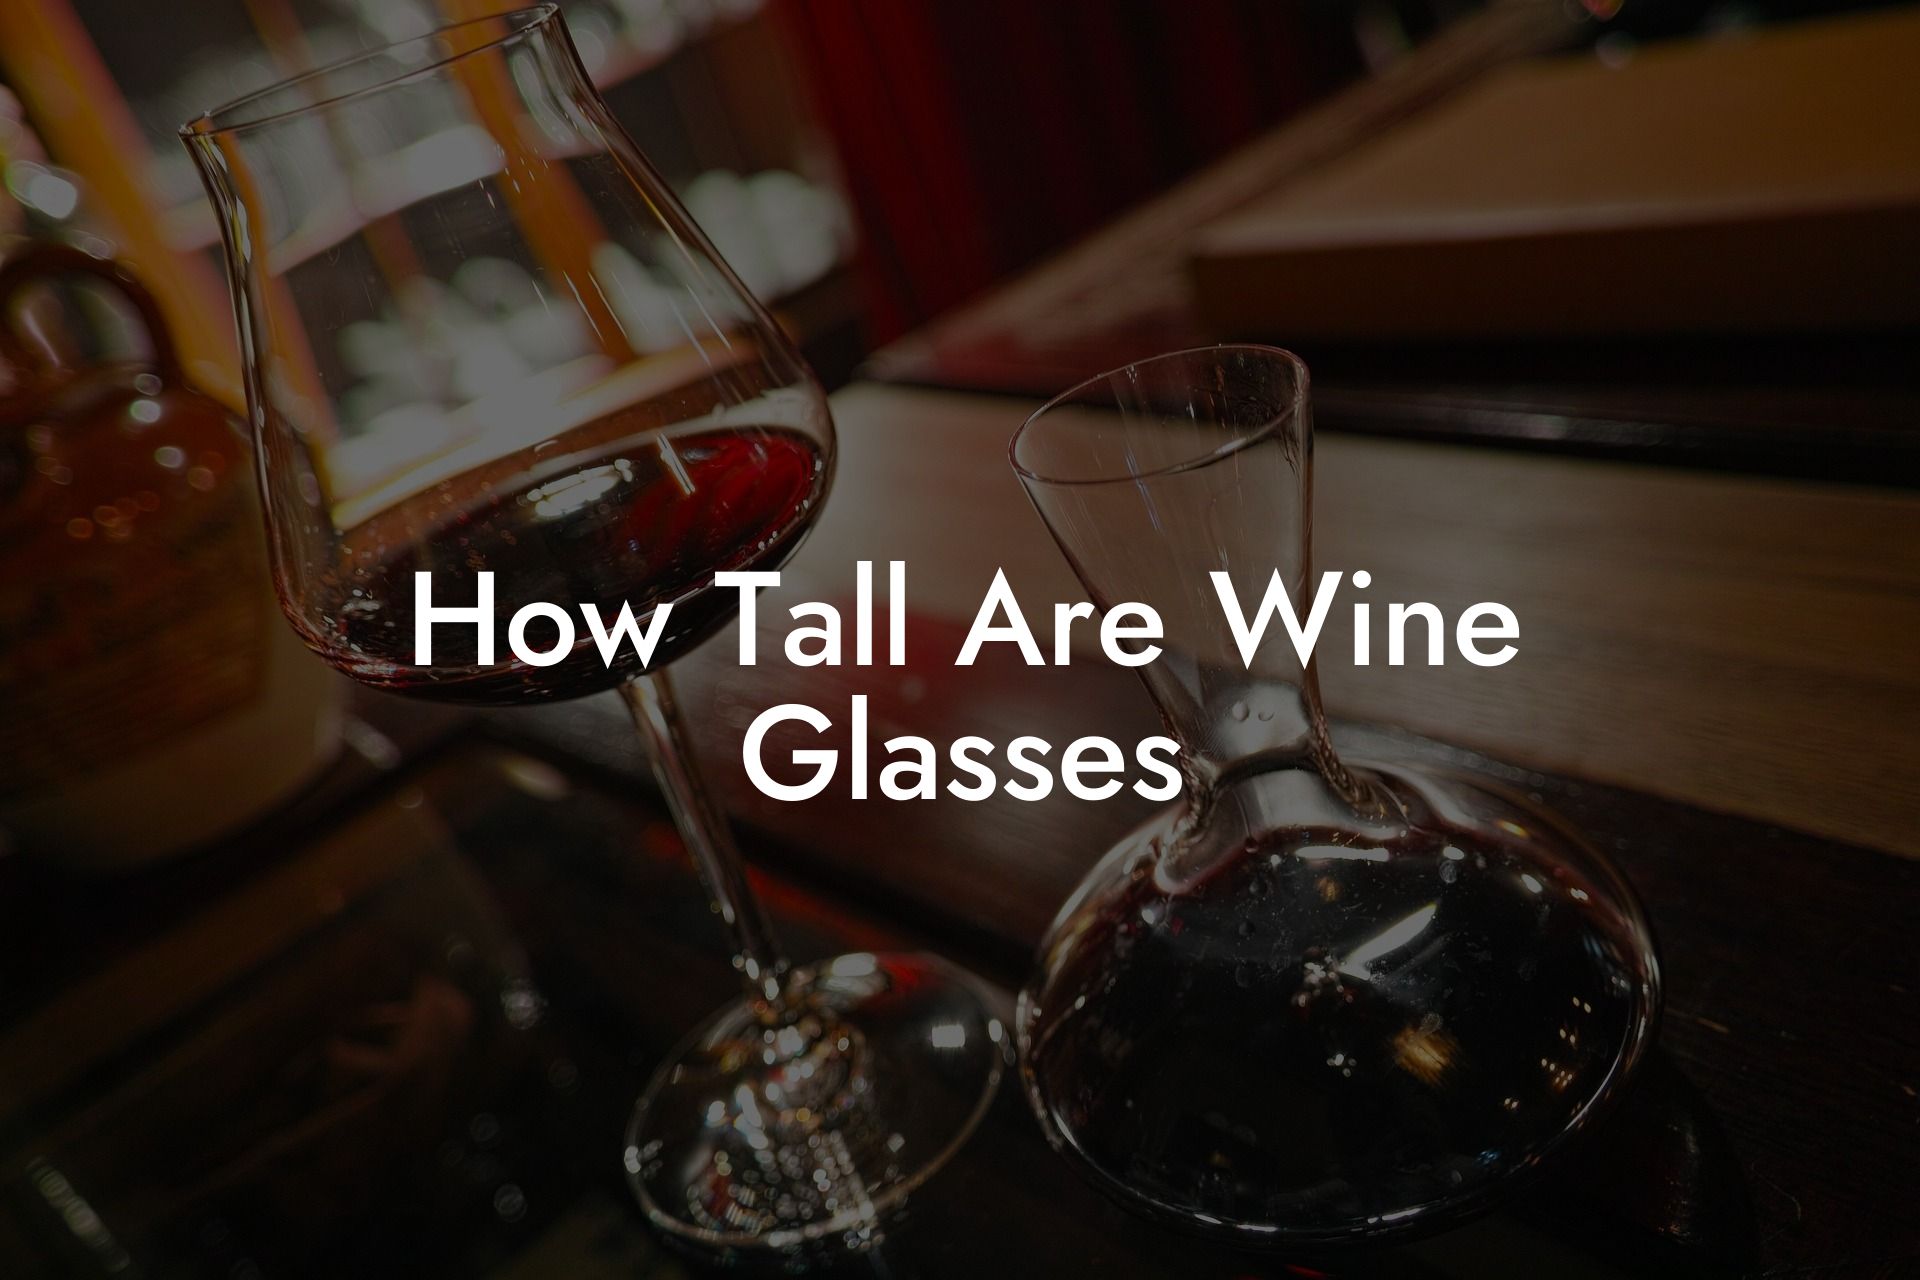 How Tall Are Wine Glasses